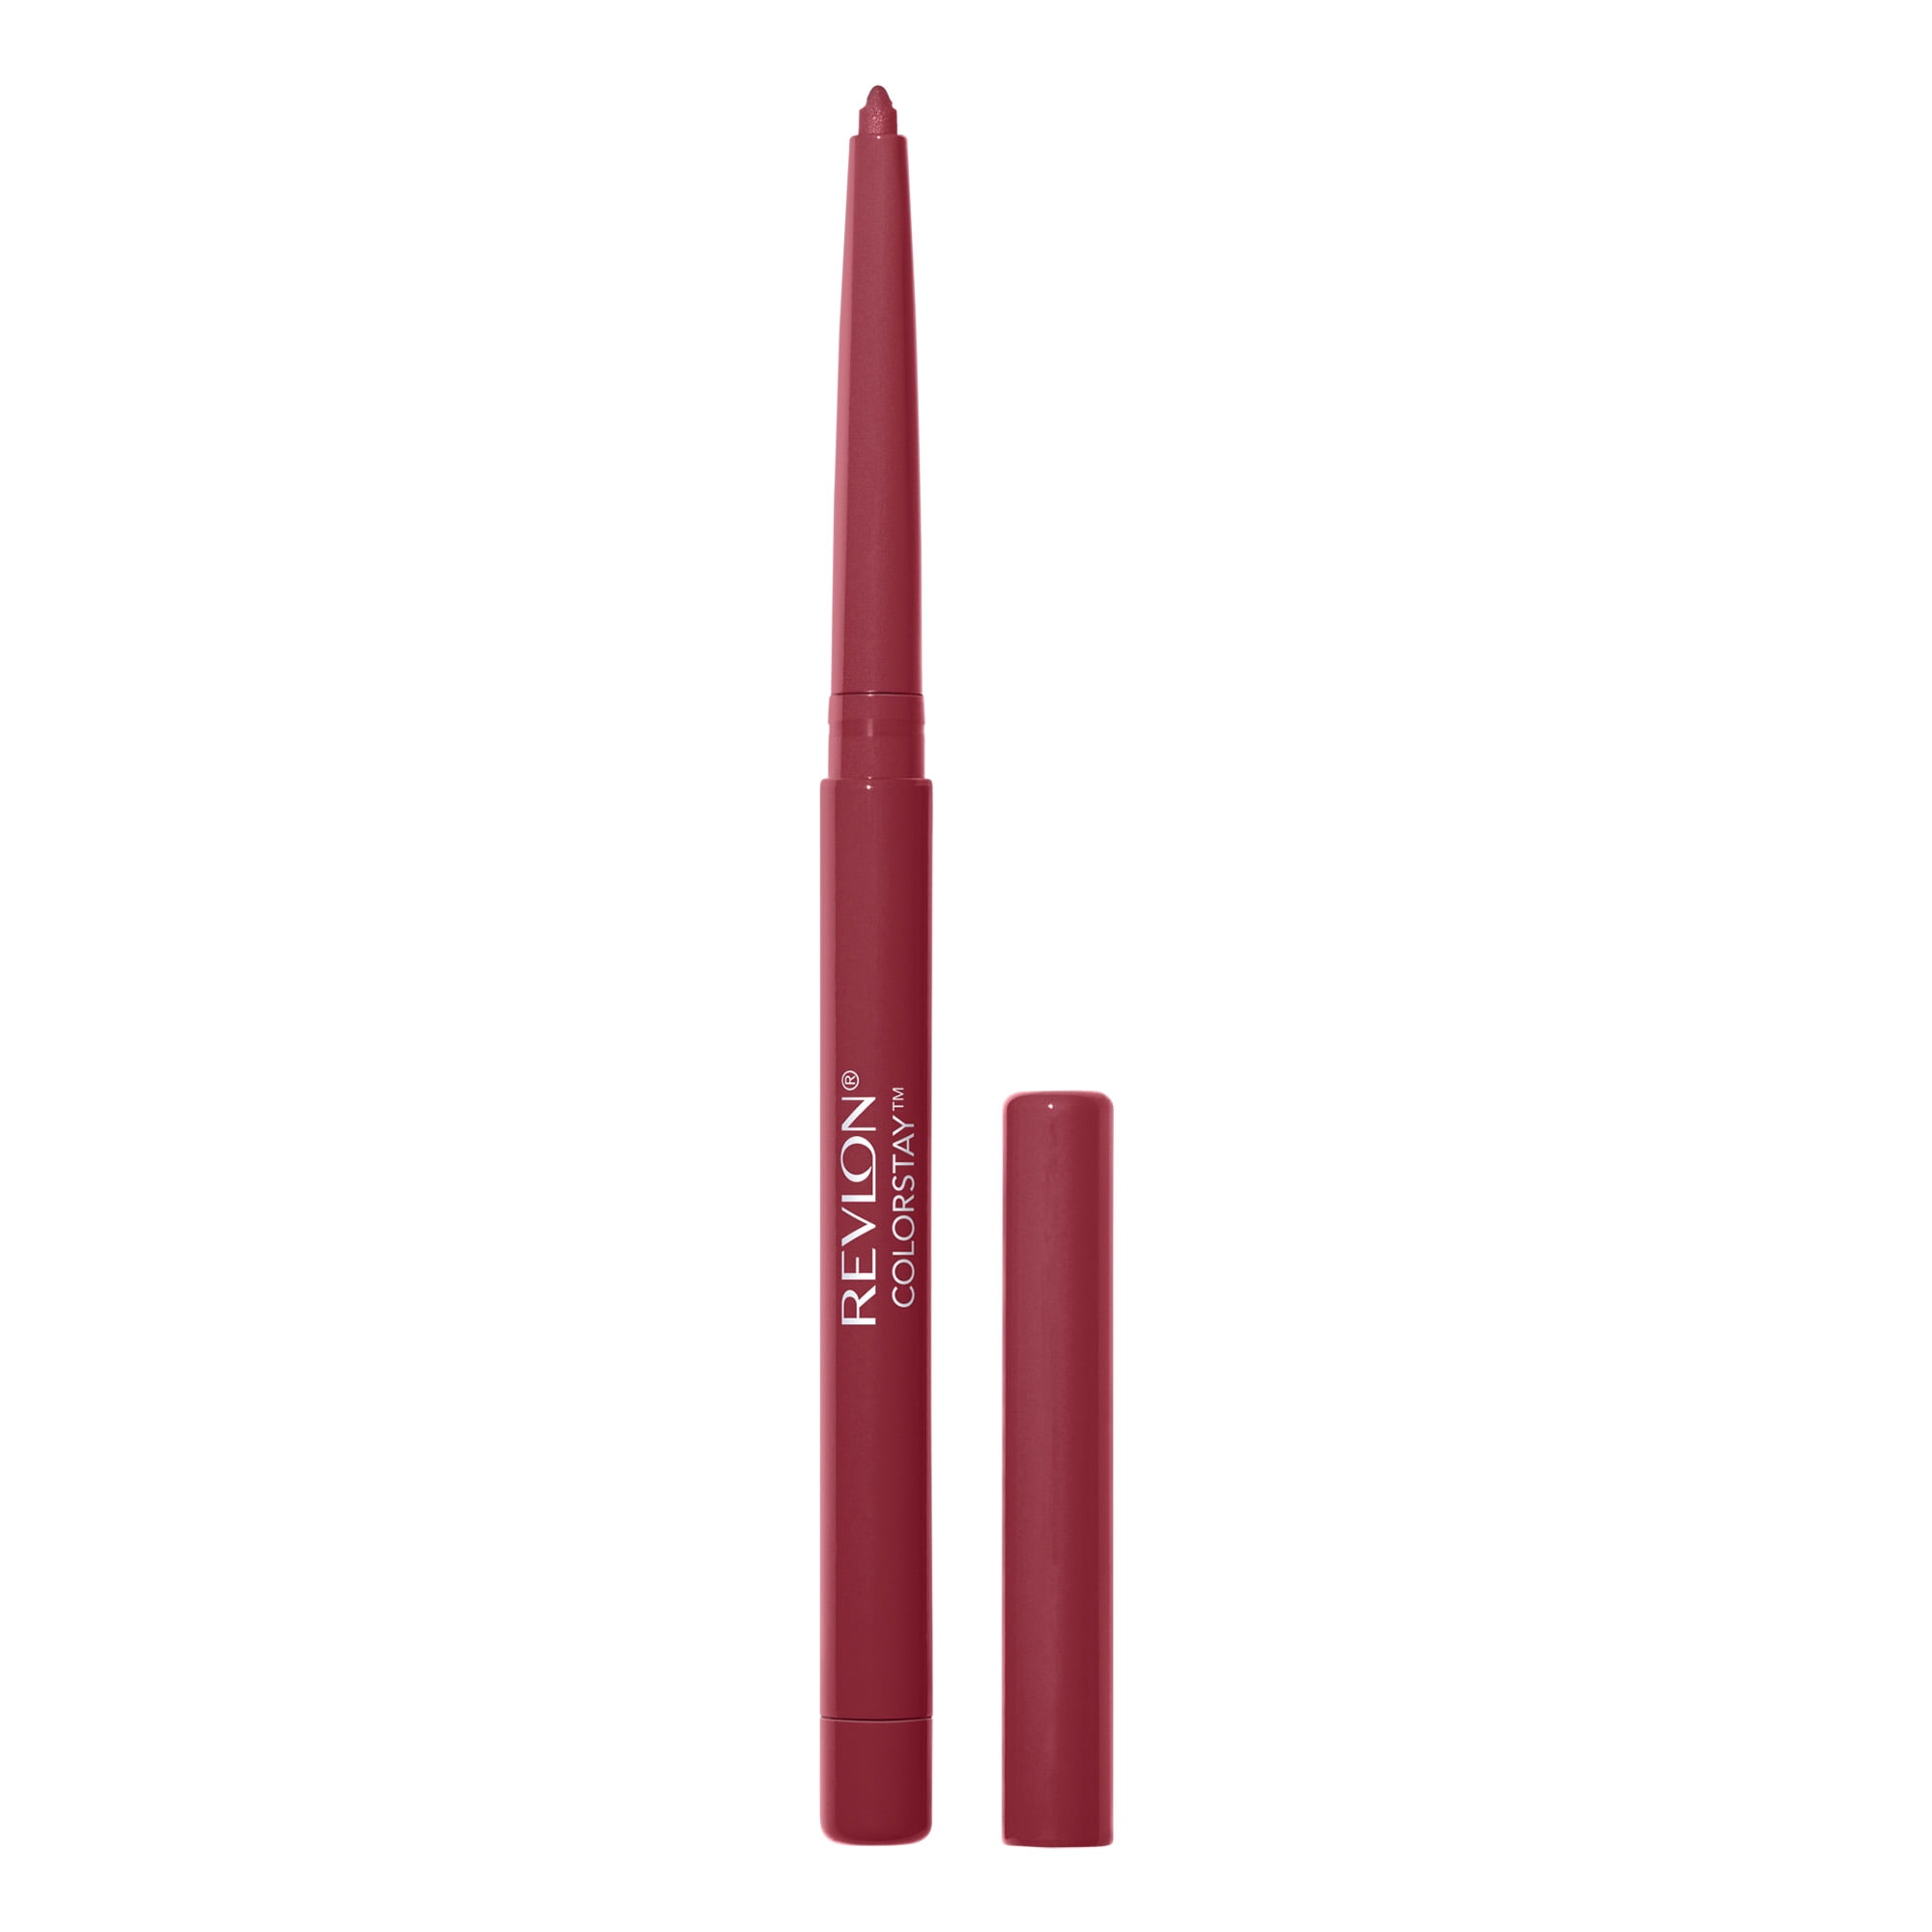 Revlon Lip Liner by Revlon, Colorstay Face Makeup with Built-in-Sharpener, Longwear Rich Lip Colors, Smooth Application, 670 Wine, 670 Wine, 0.01 oz